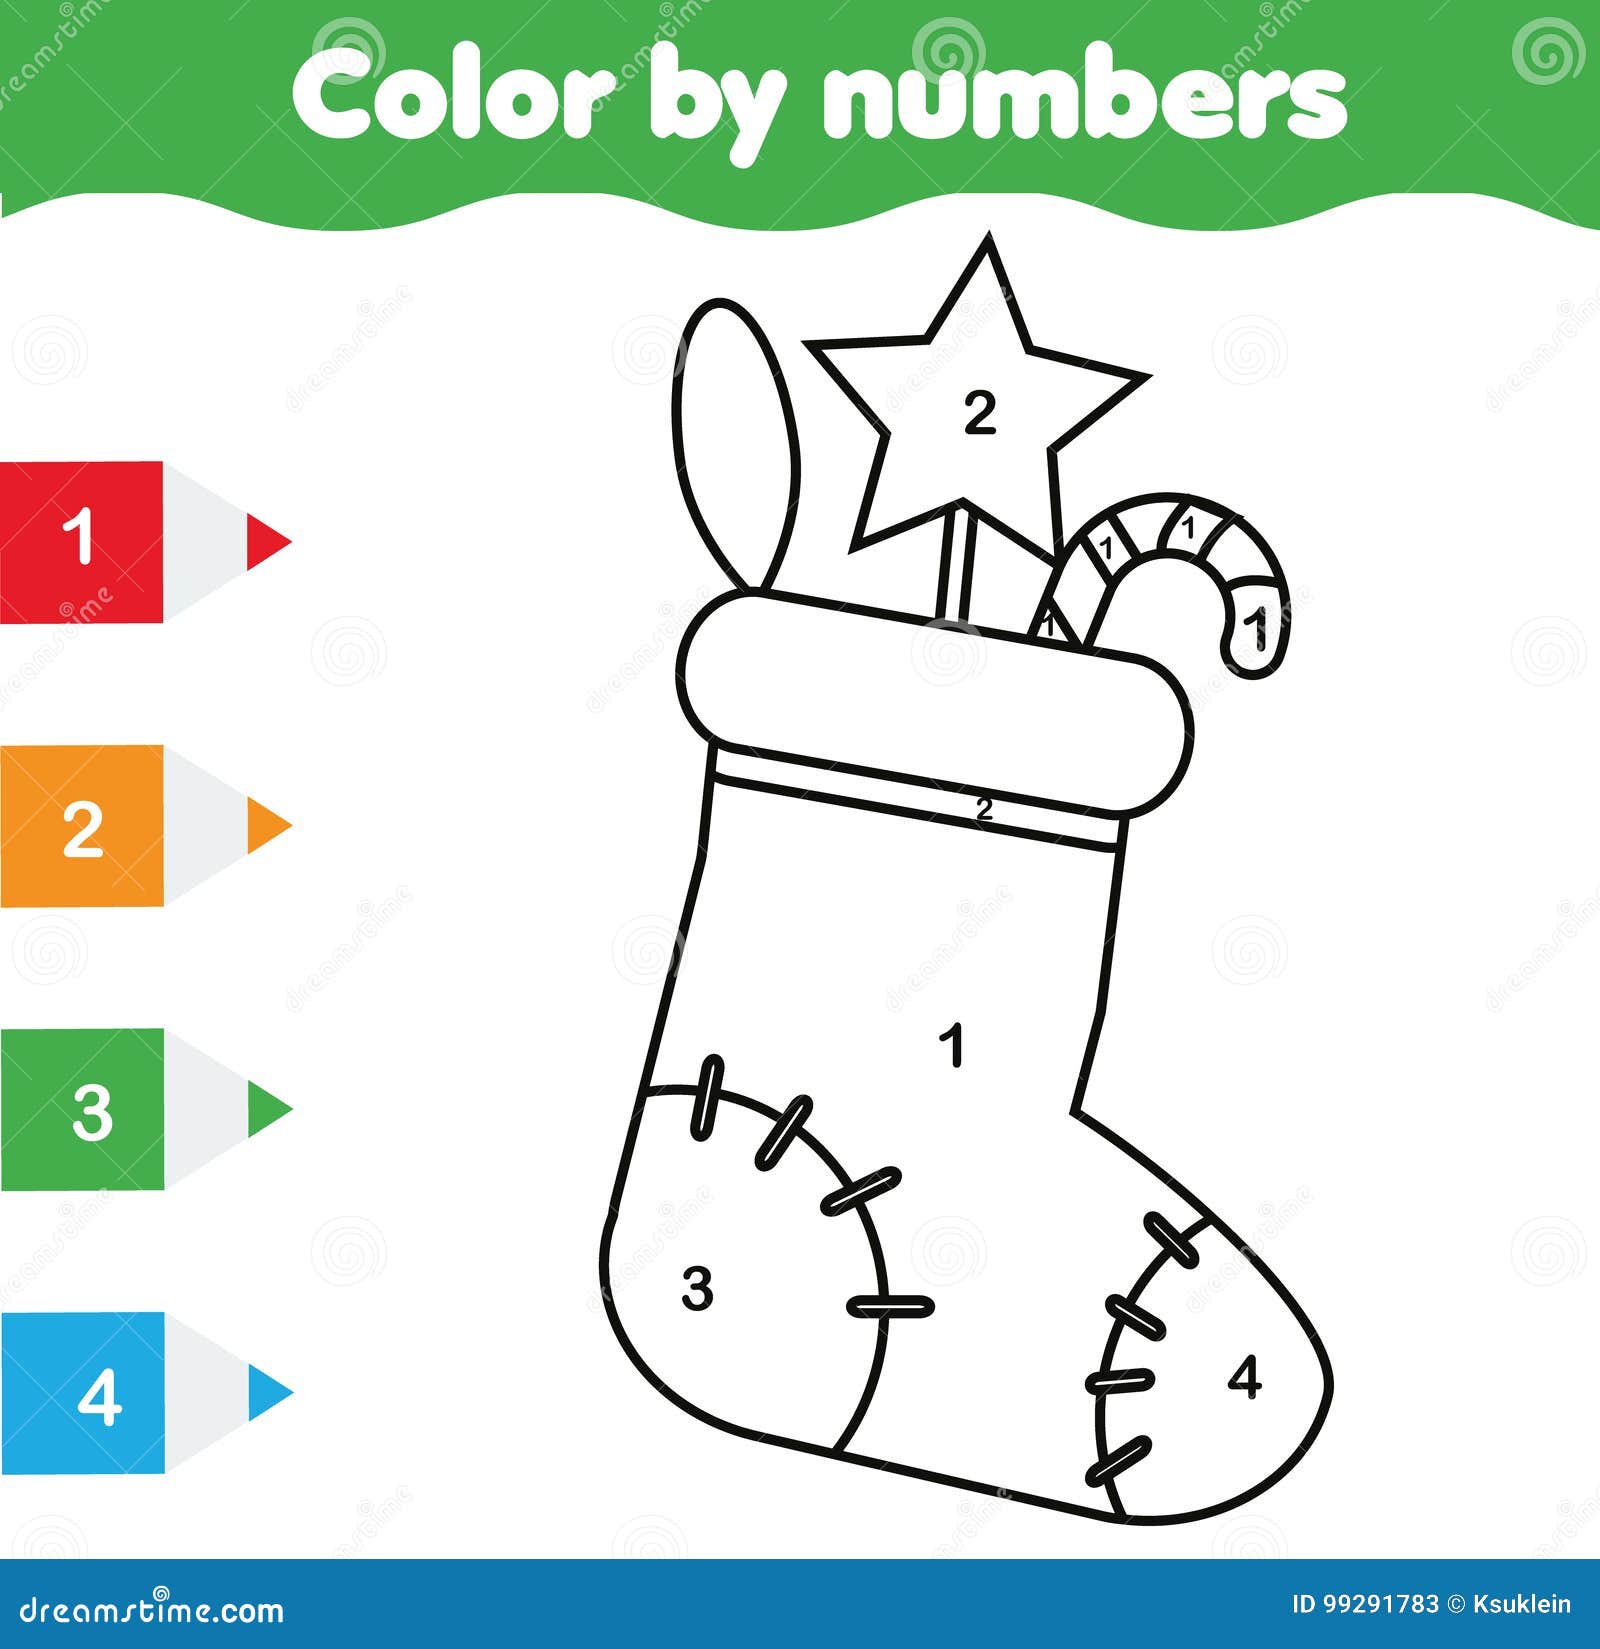 coloring page with christmas sock. color by numbers educational children game, drawing kids activity. new year holidays theme